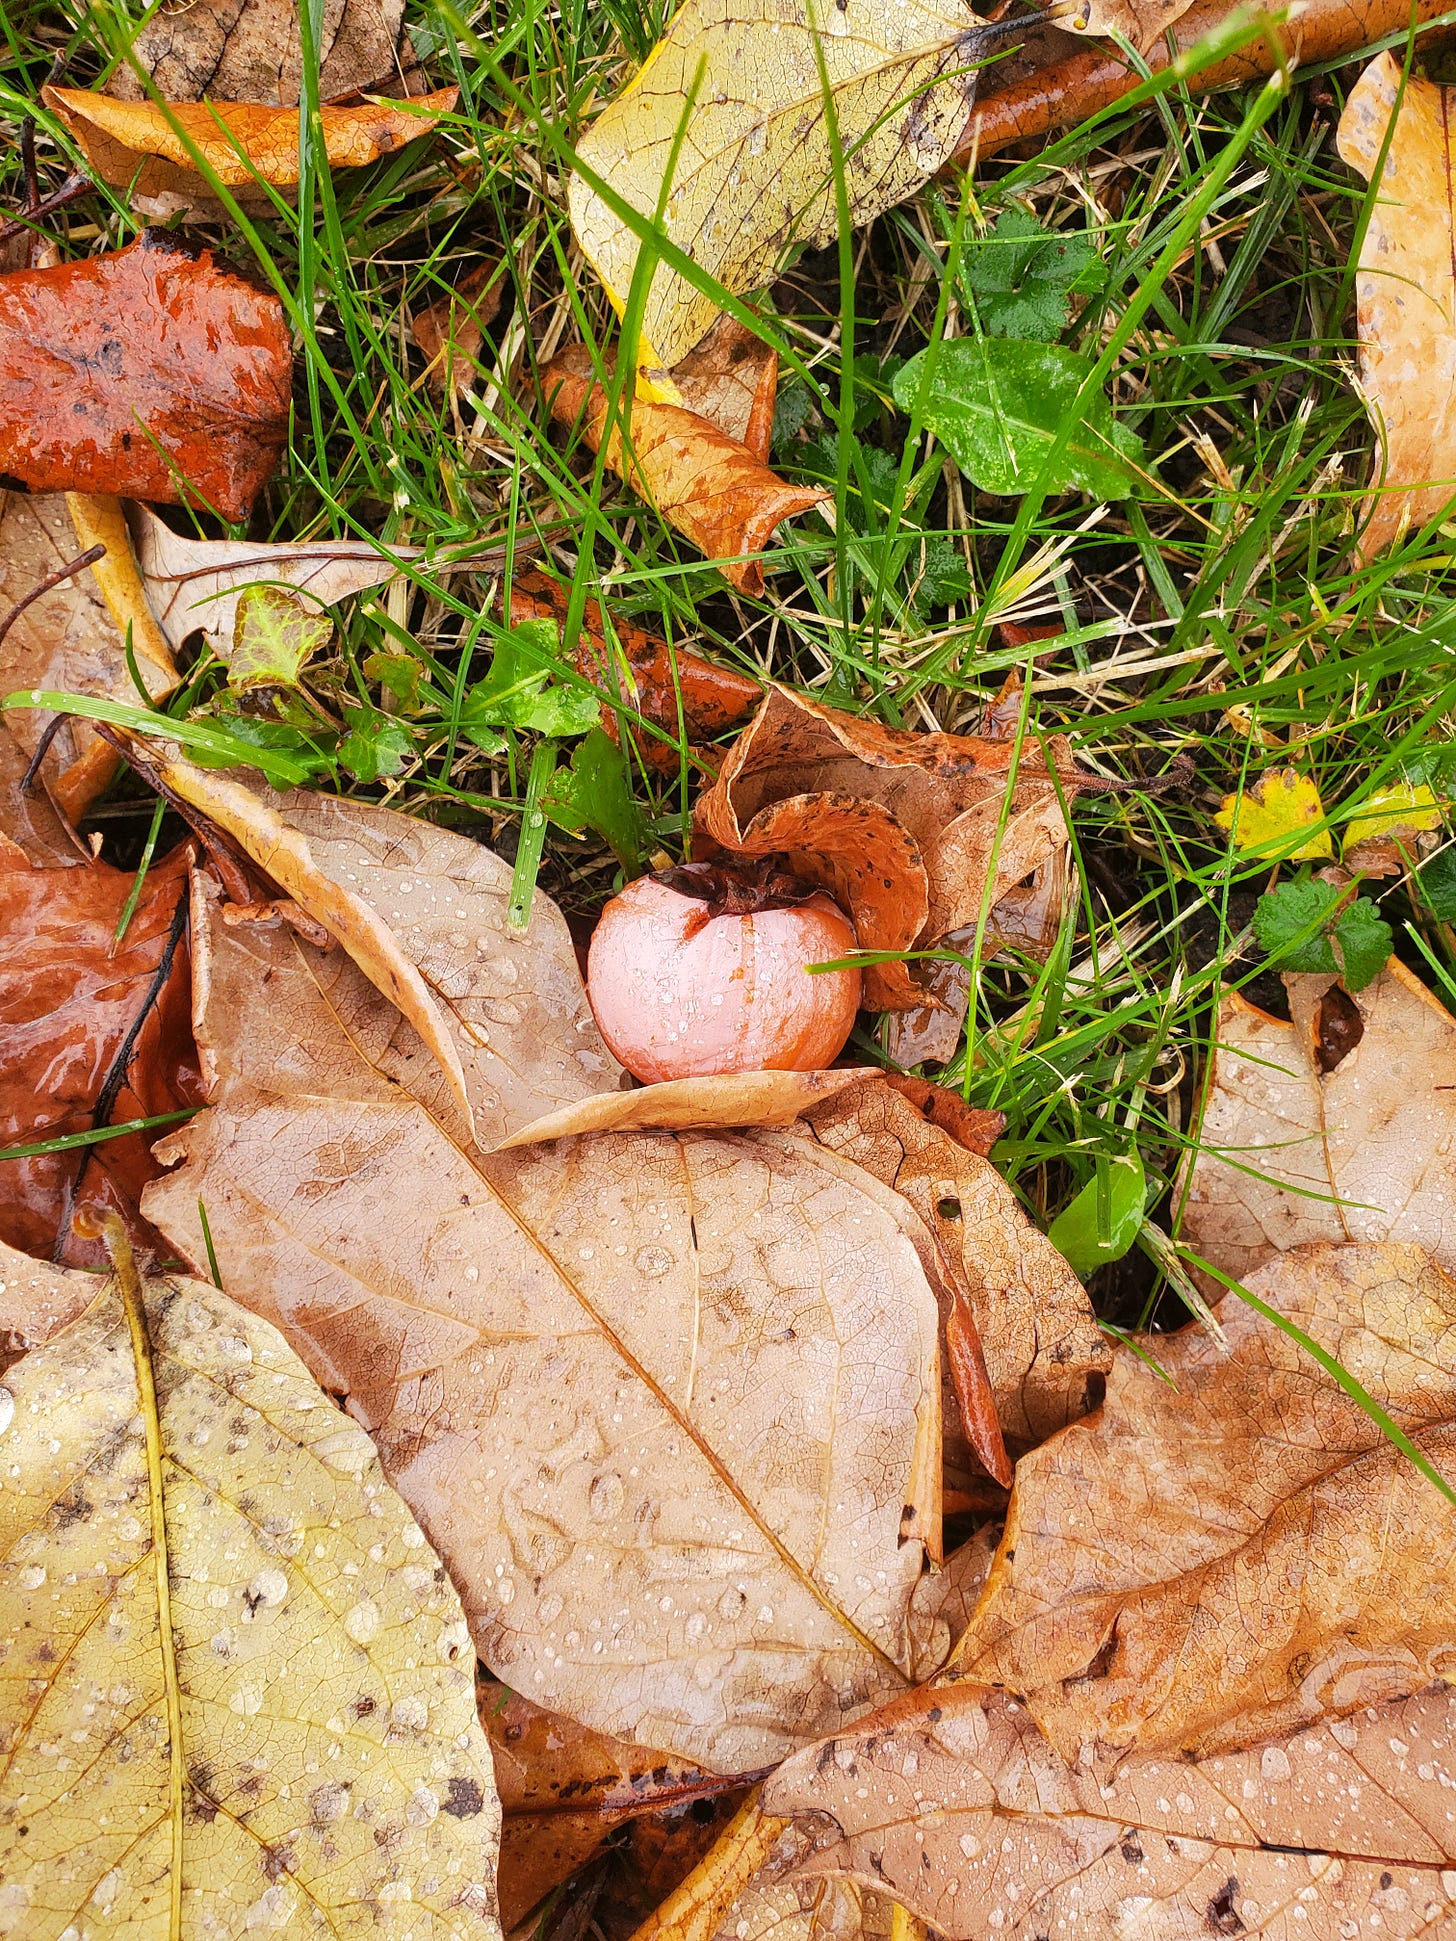 A persimmon on the ground amid leaves and grass